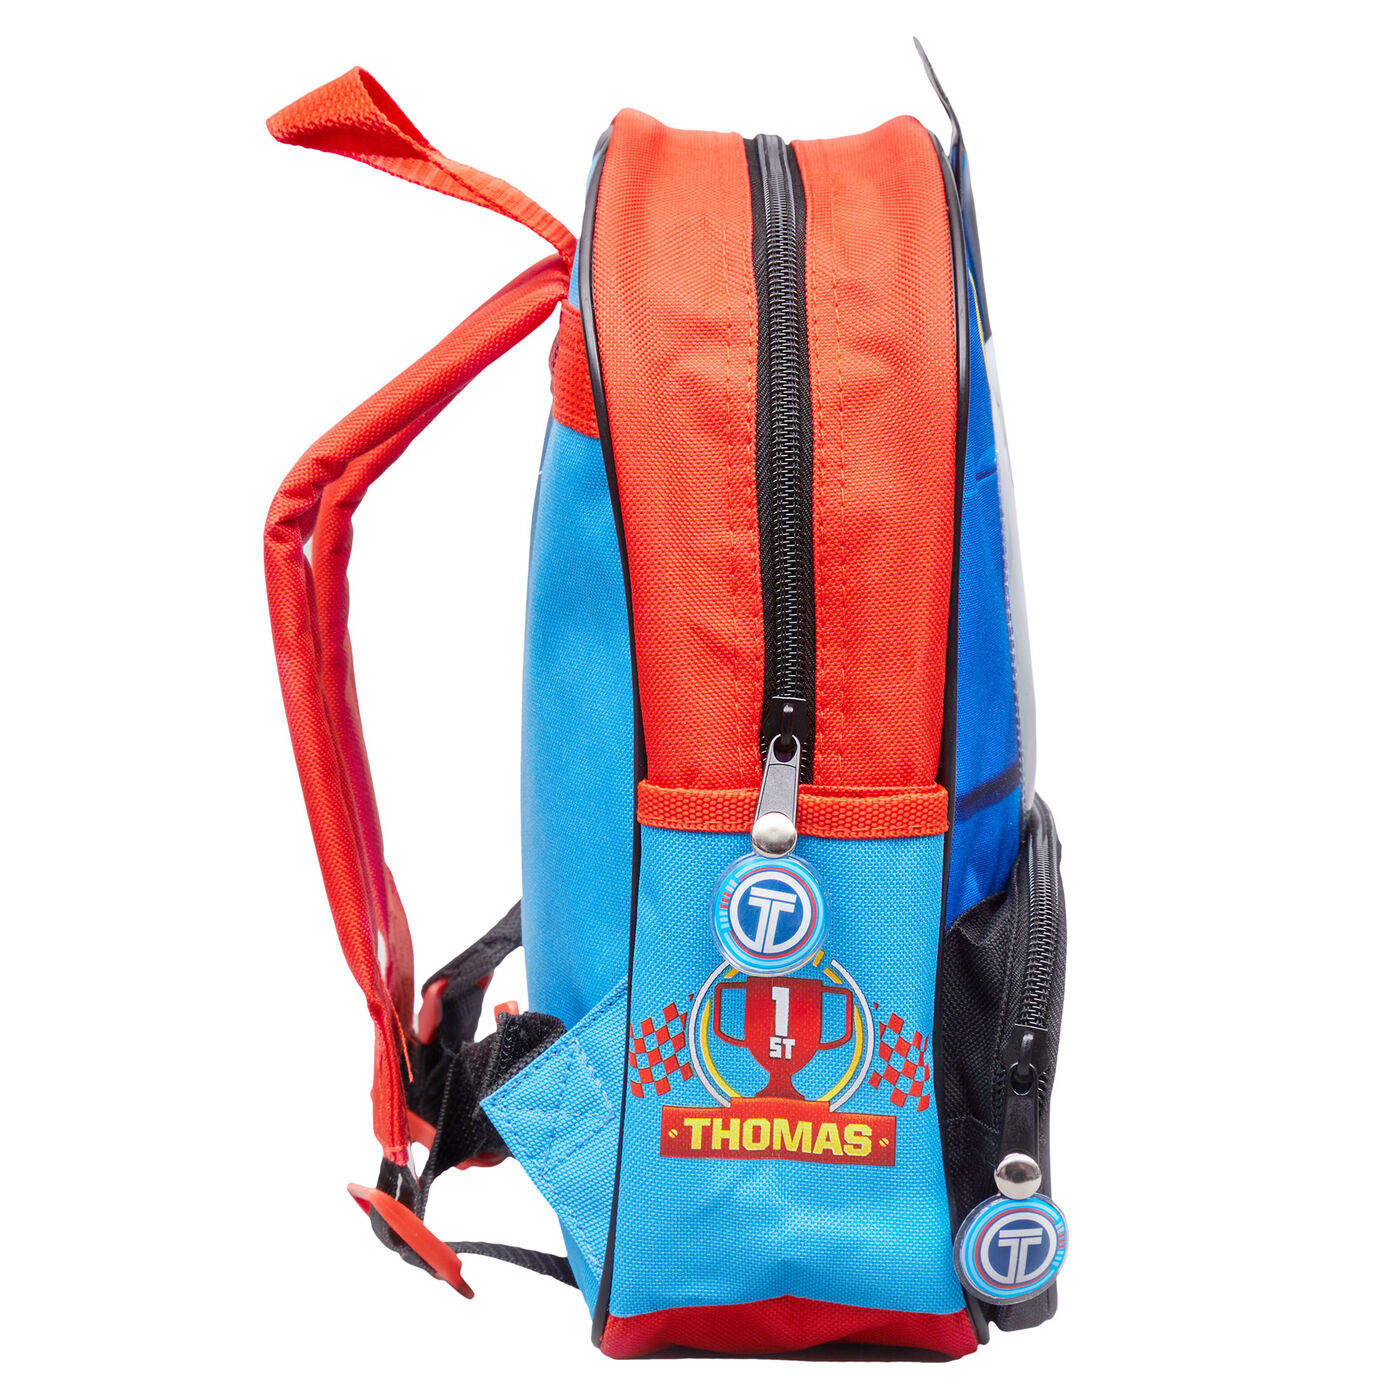 Buy Thomas & Friends Backpack for GBP 12.99 | Card Factory UK